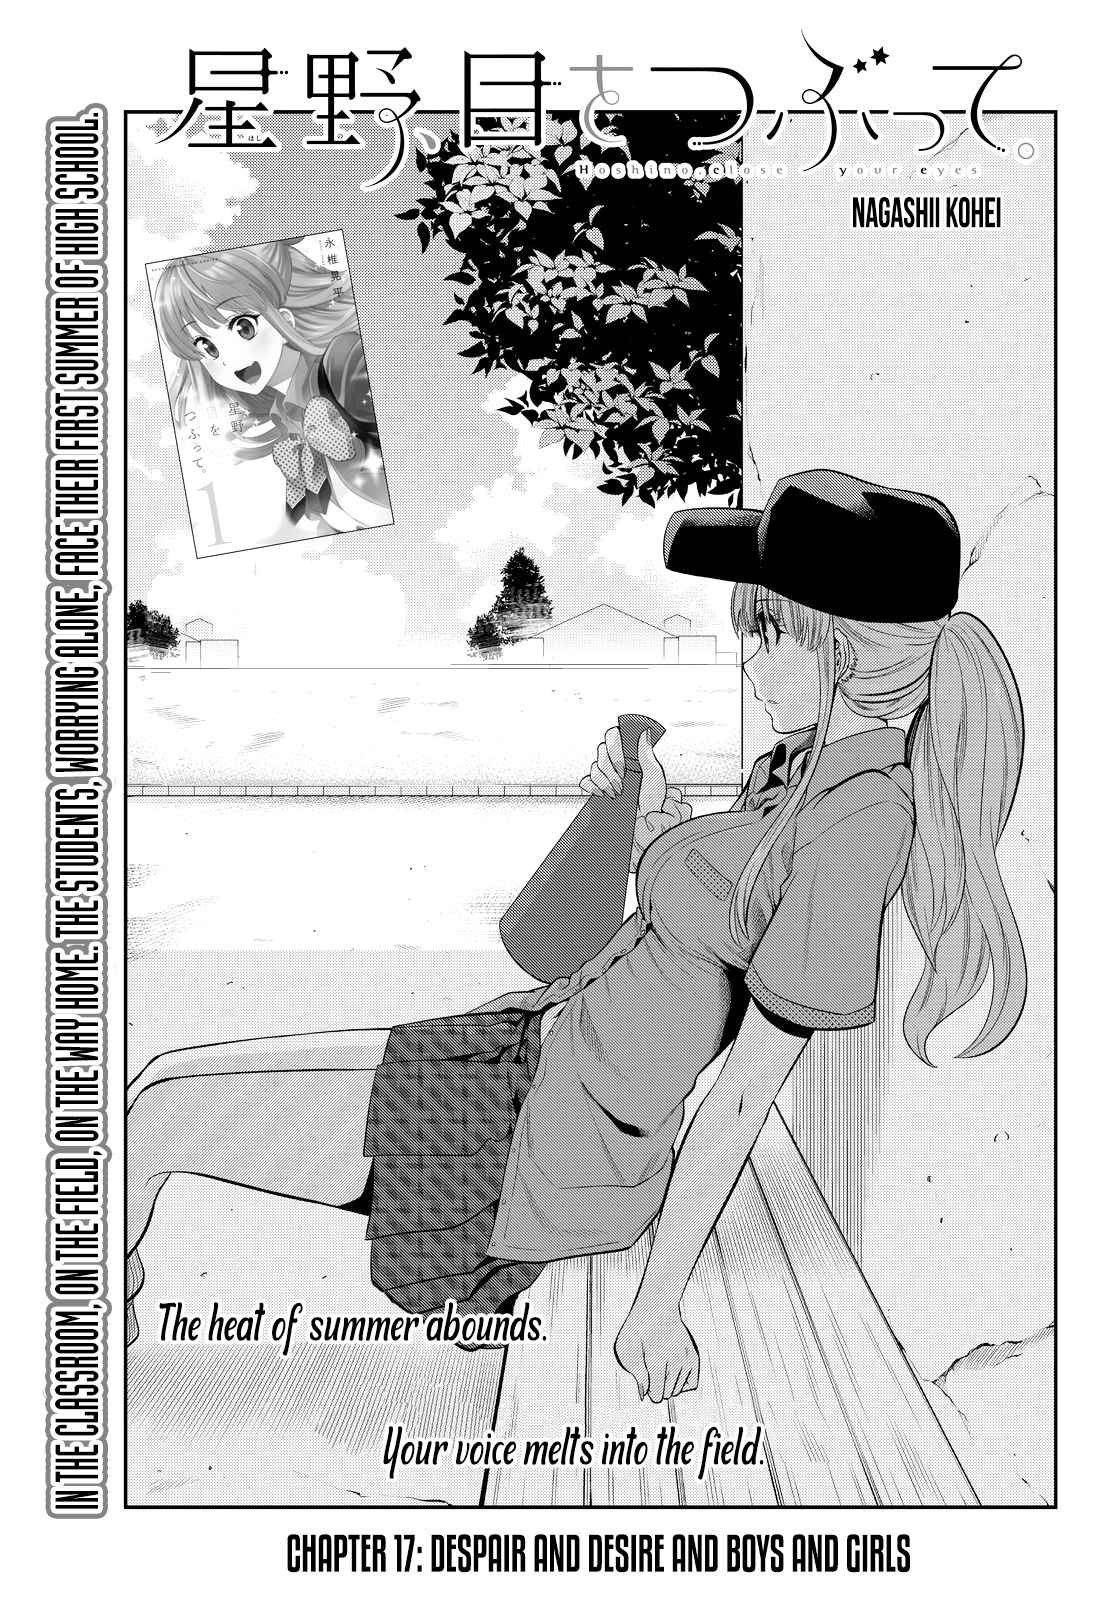 Hoshino, Me O Tsubutte Vol. 3 Ch. 17 Despair and Desire and Boys and Girls